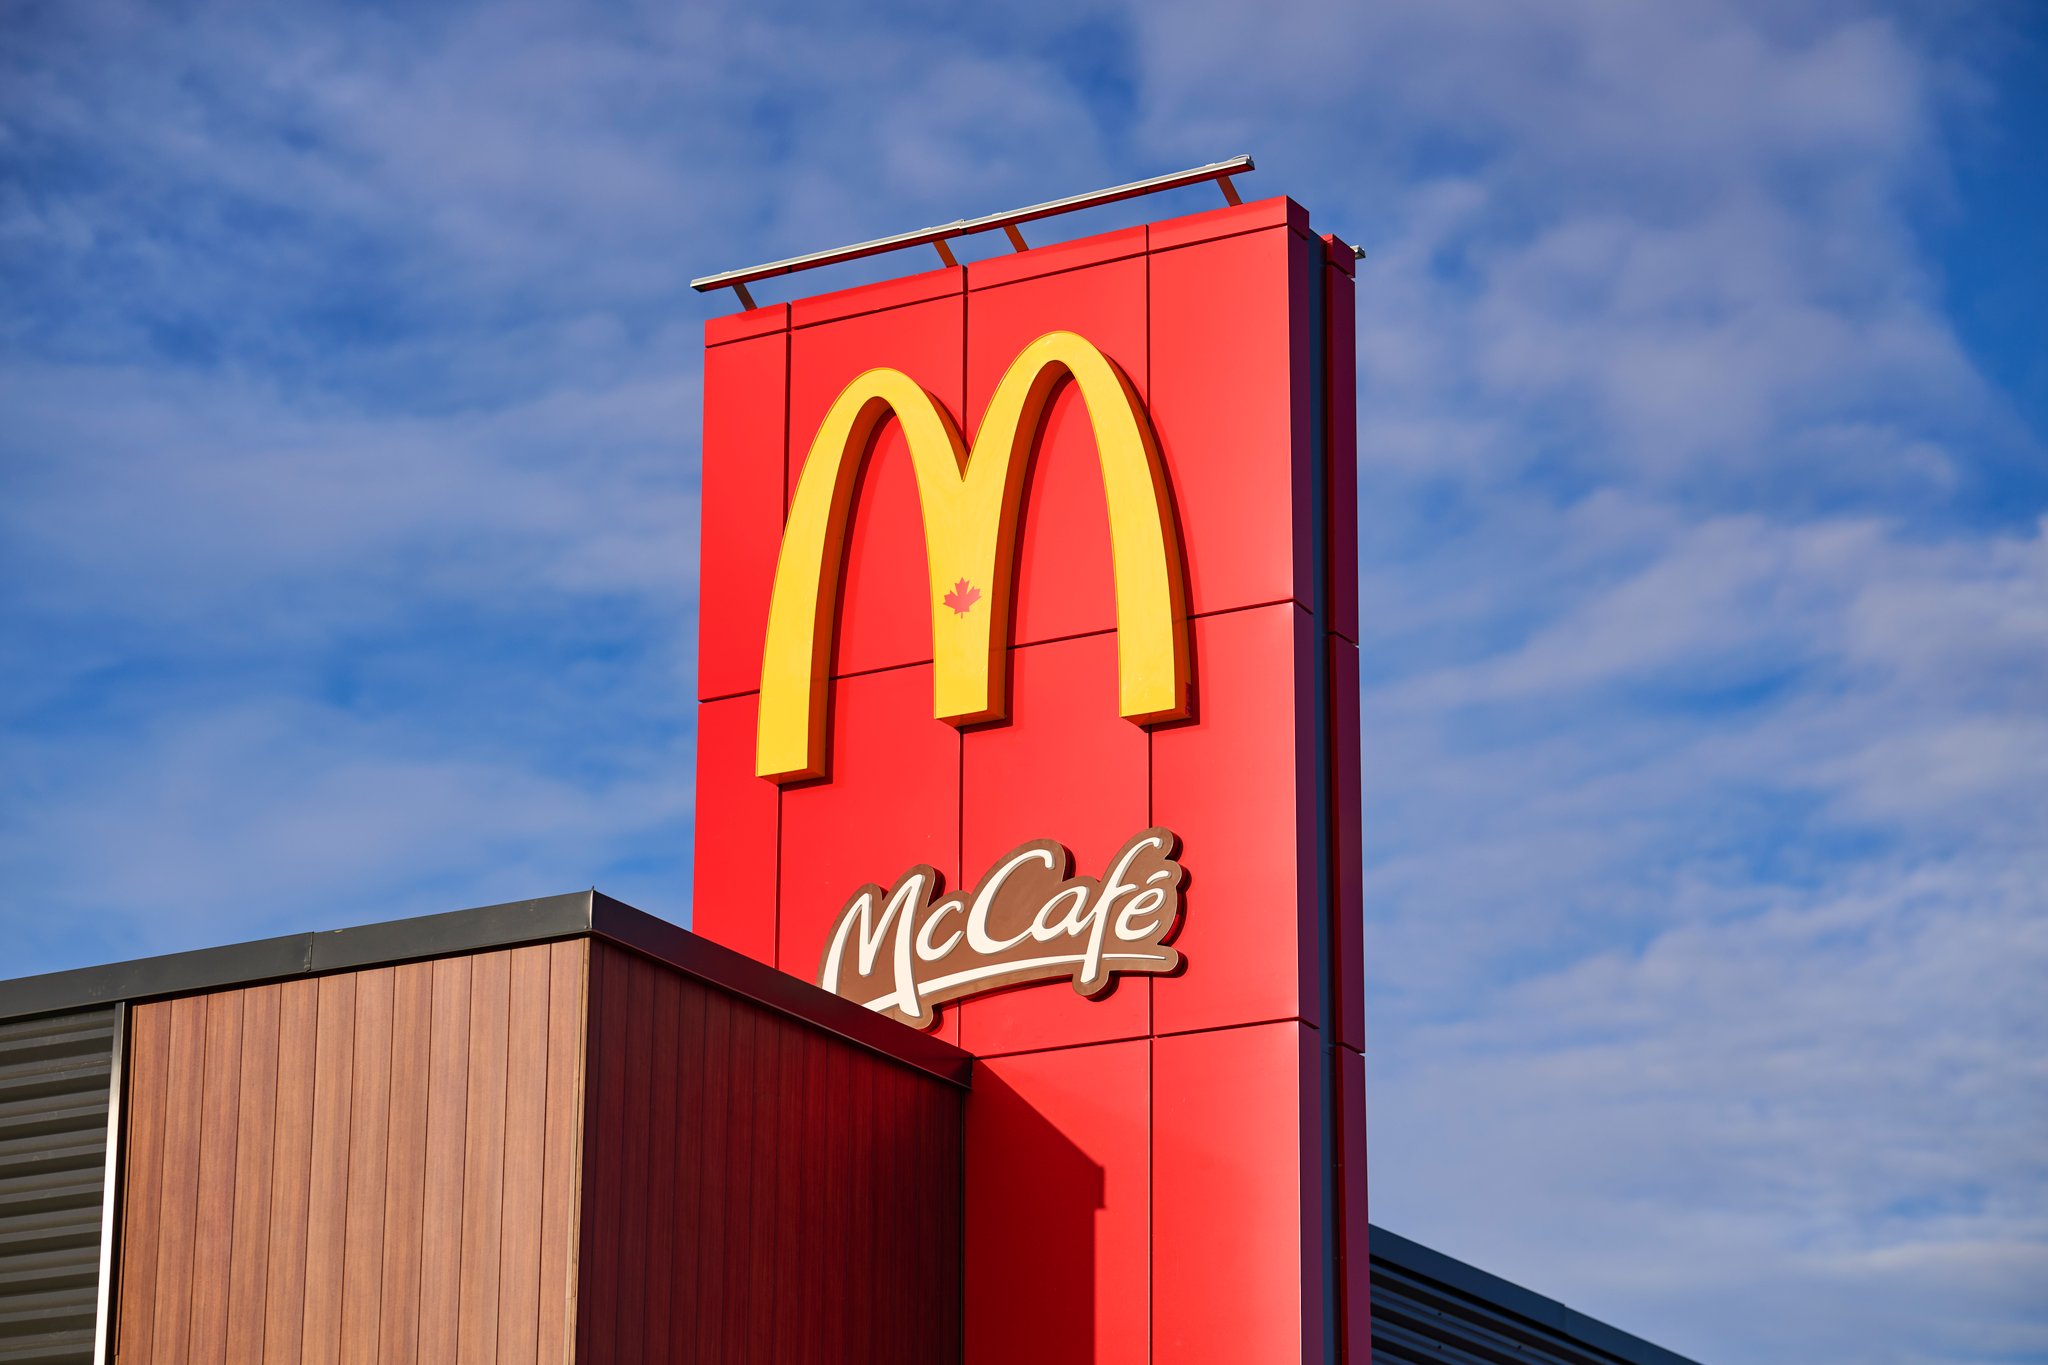 The following is a case study about a series of impressive architecture photography projects we completed for mcdonald's restaurants of canada limited. The projects took place in western ontario and were focused on new build properties. The goal of these photography projects was to capture interior shots and exterior shots of these modern buildings and to showcase mcdonald's latest concepts and designs.